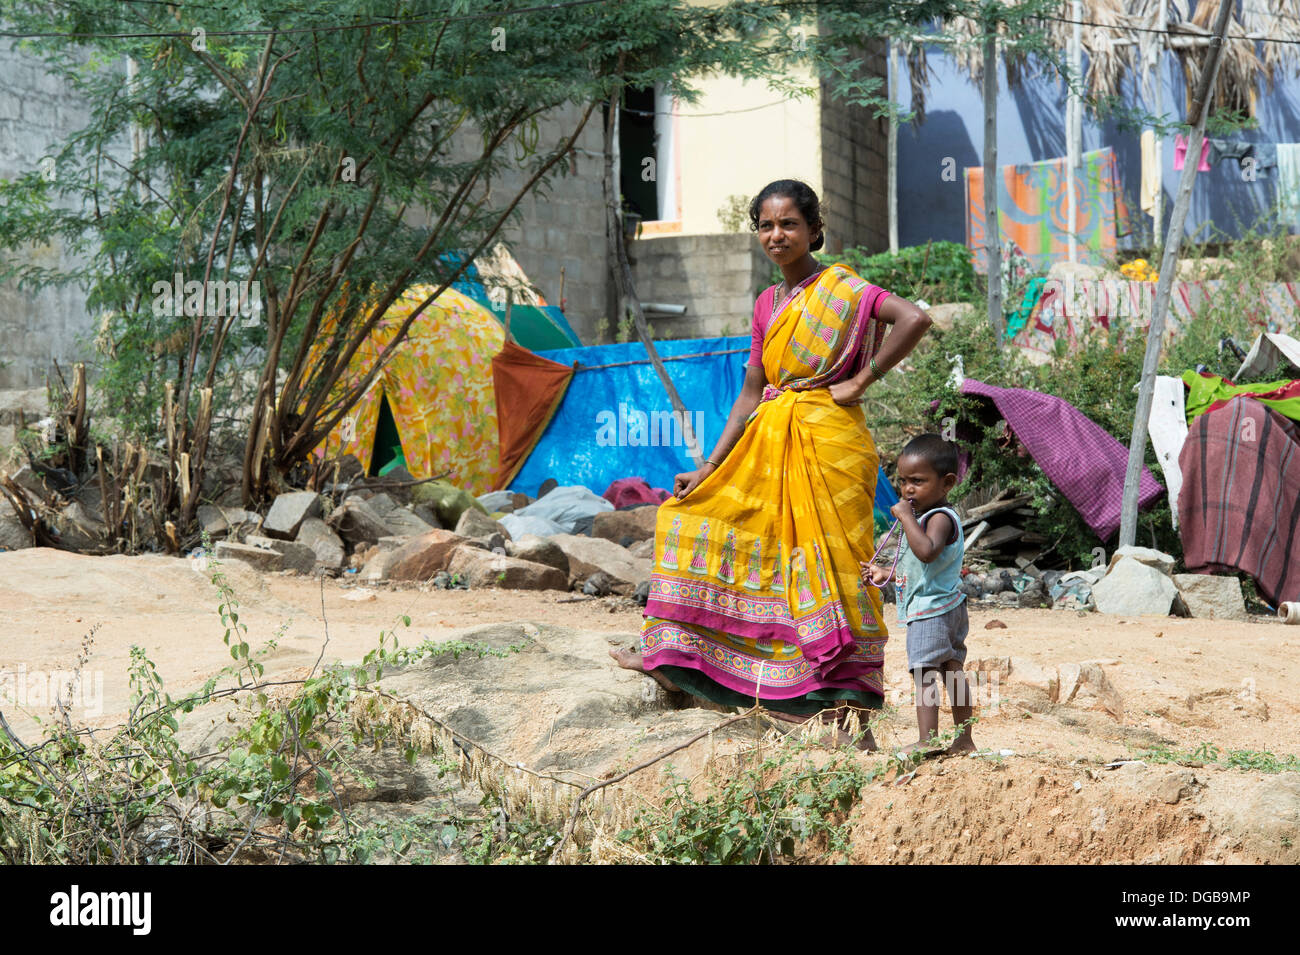 Lower caste Indian woman and child standing outside her bender / tent / shelter. Andhra Pradesh, India Stock Photo